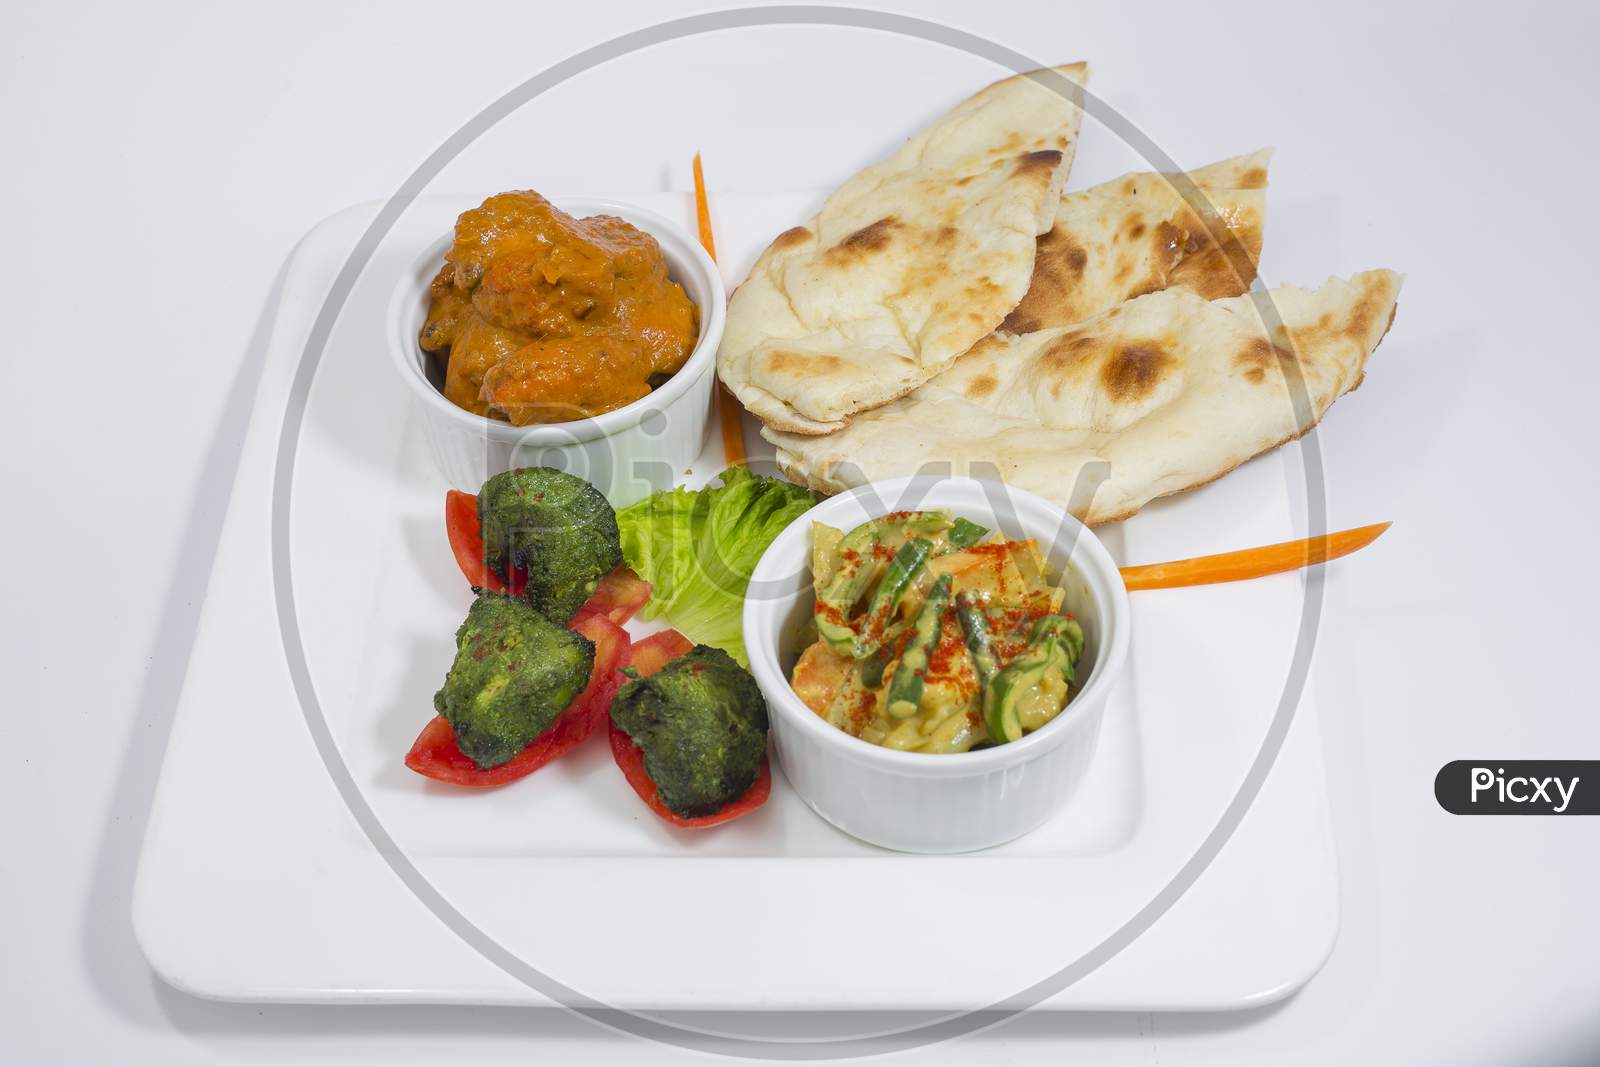 Chicken Harialy Kabab, Chicken Tikka masala curry, Indian Style mix vegetable , plain nan and Green Salad Platter.